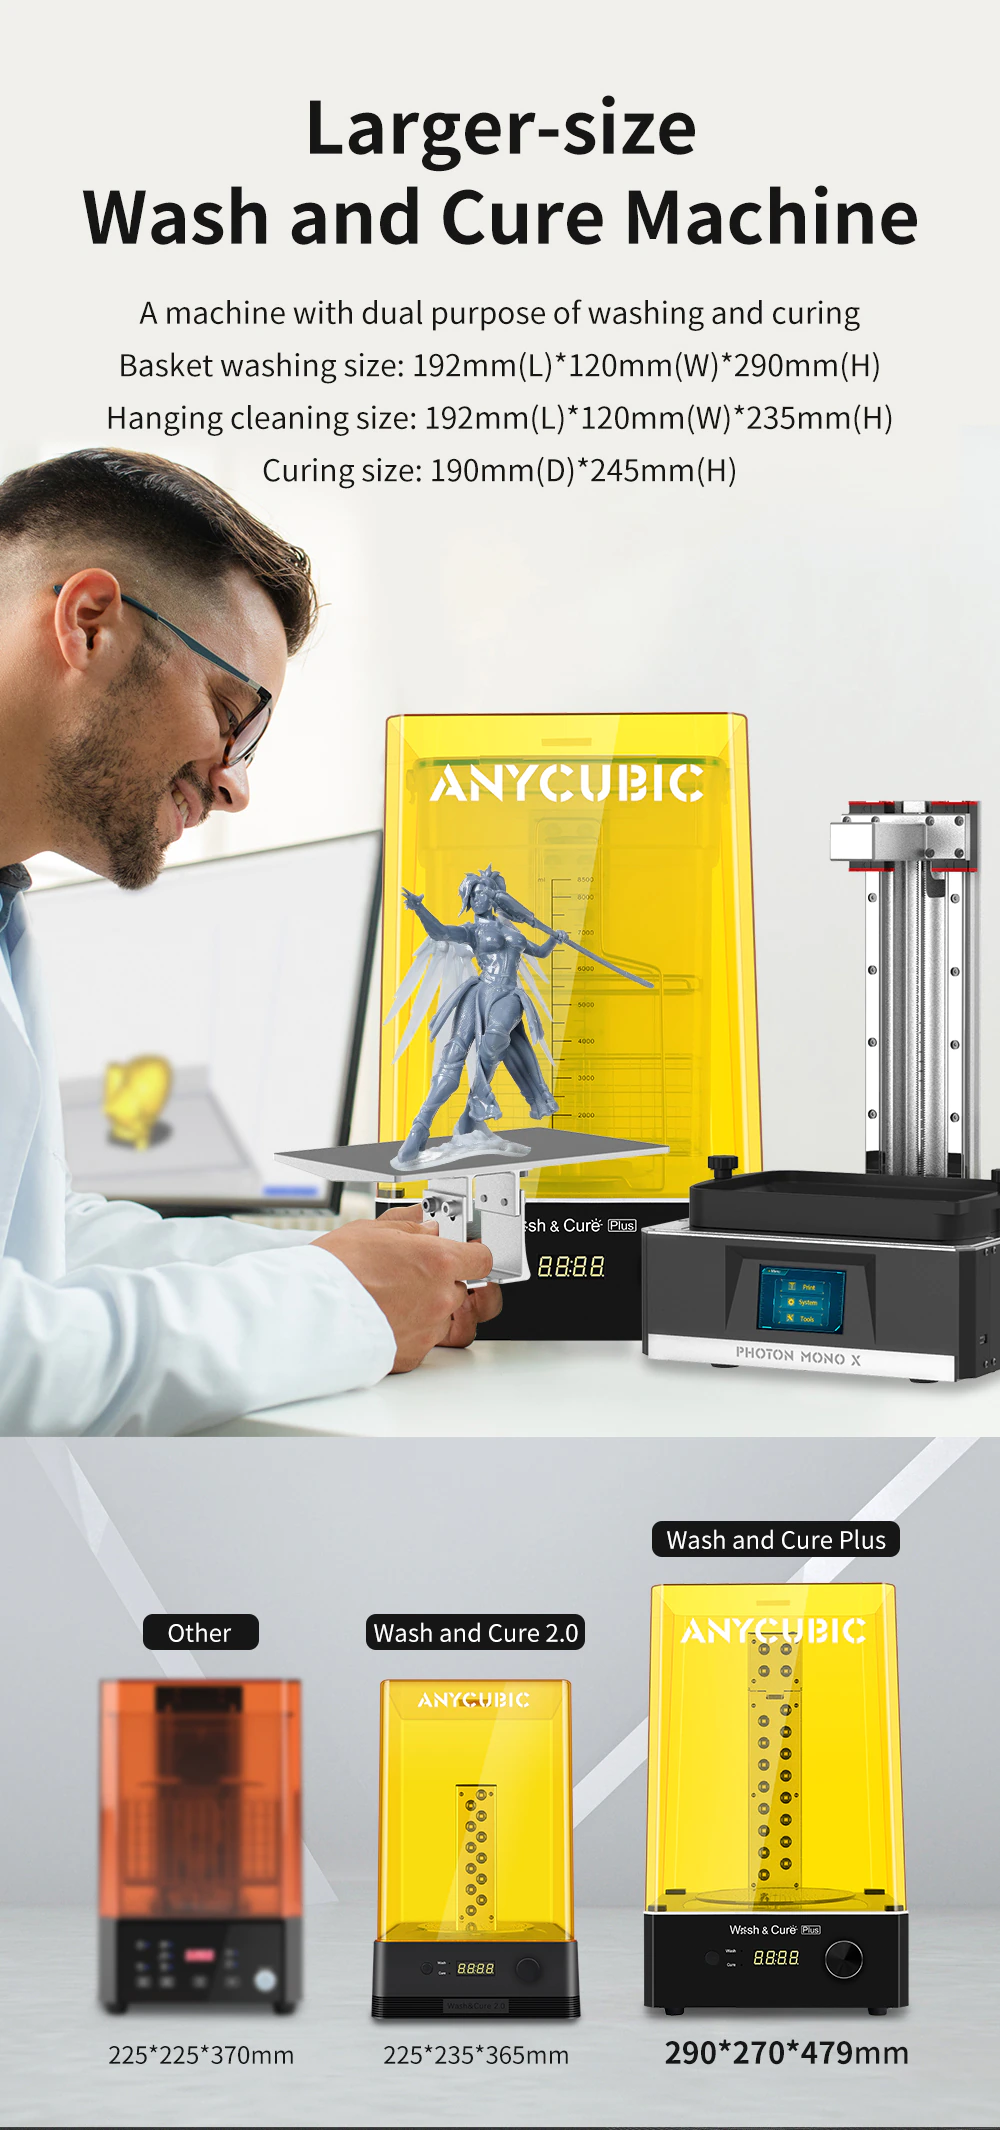 Anycubic Wash & Cure Plus